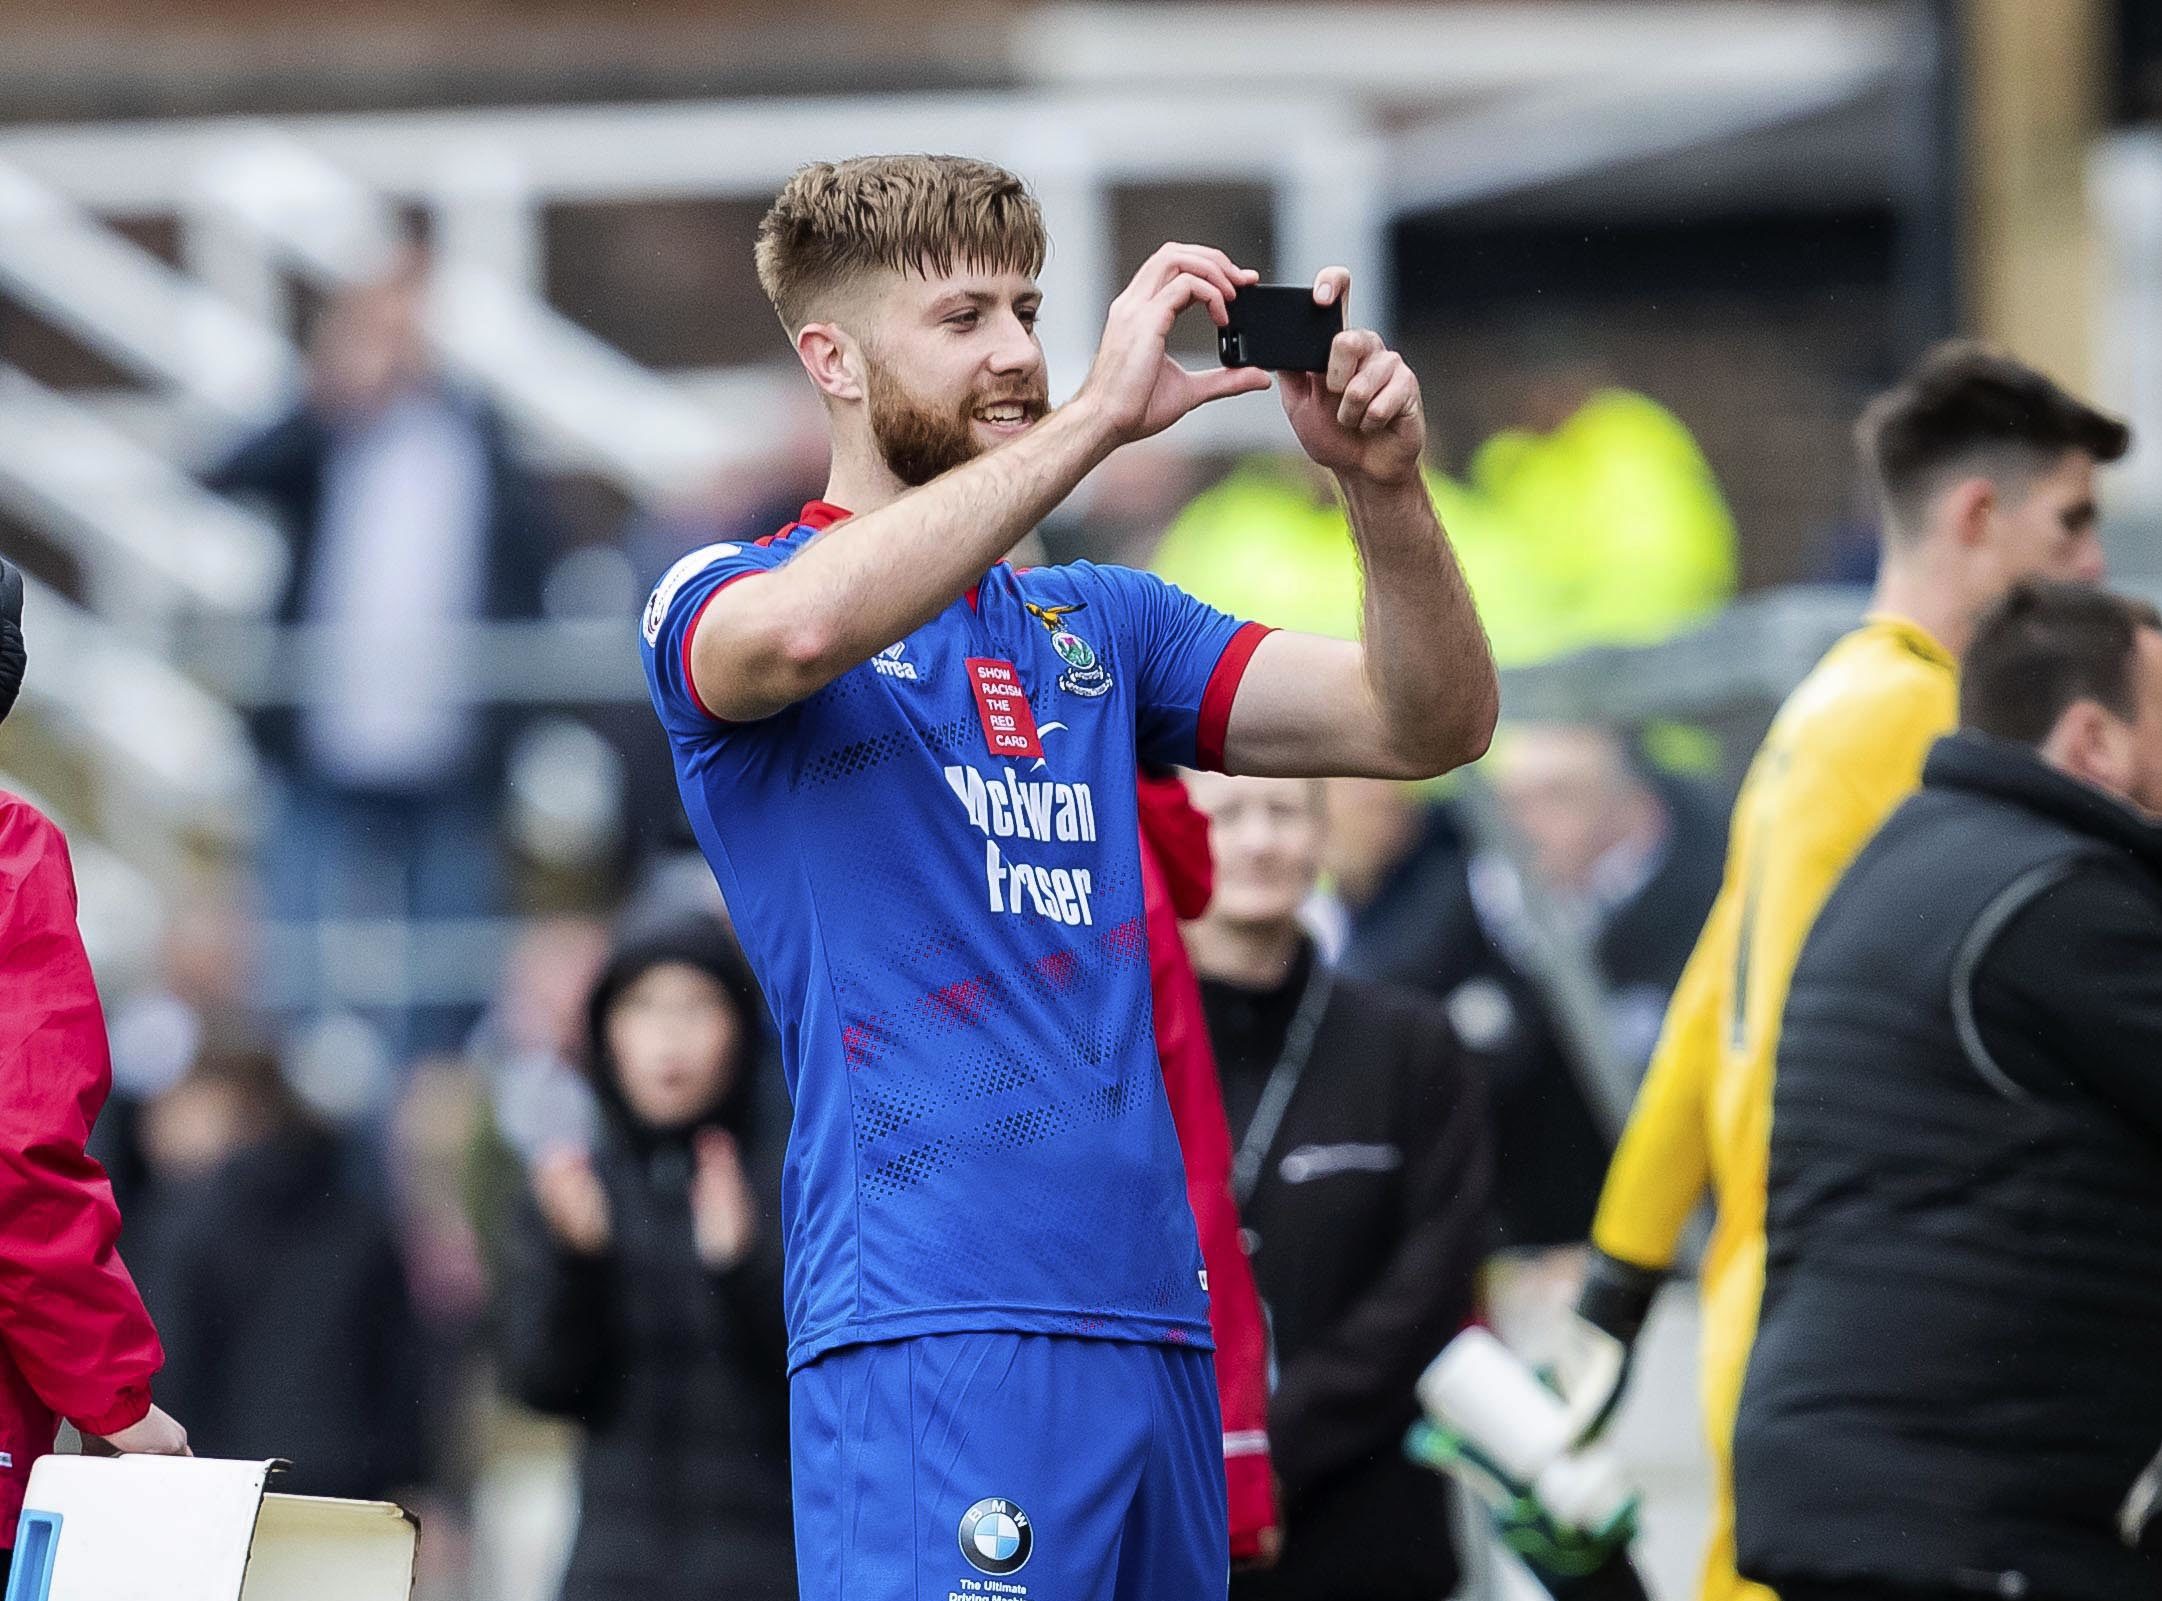 Shaun Rooney takes photos with the Caley Thistle fans at full-time.